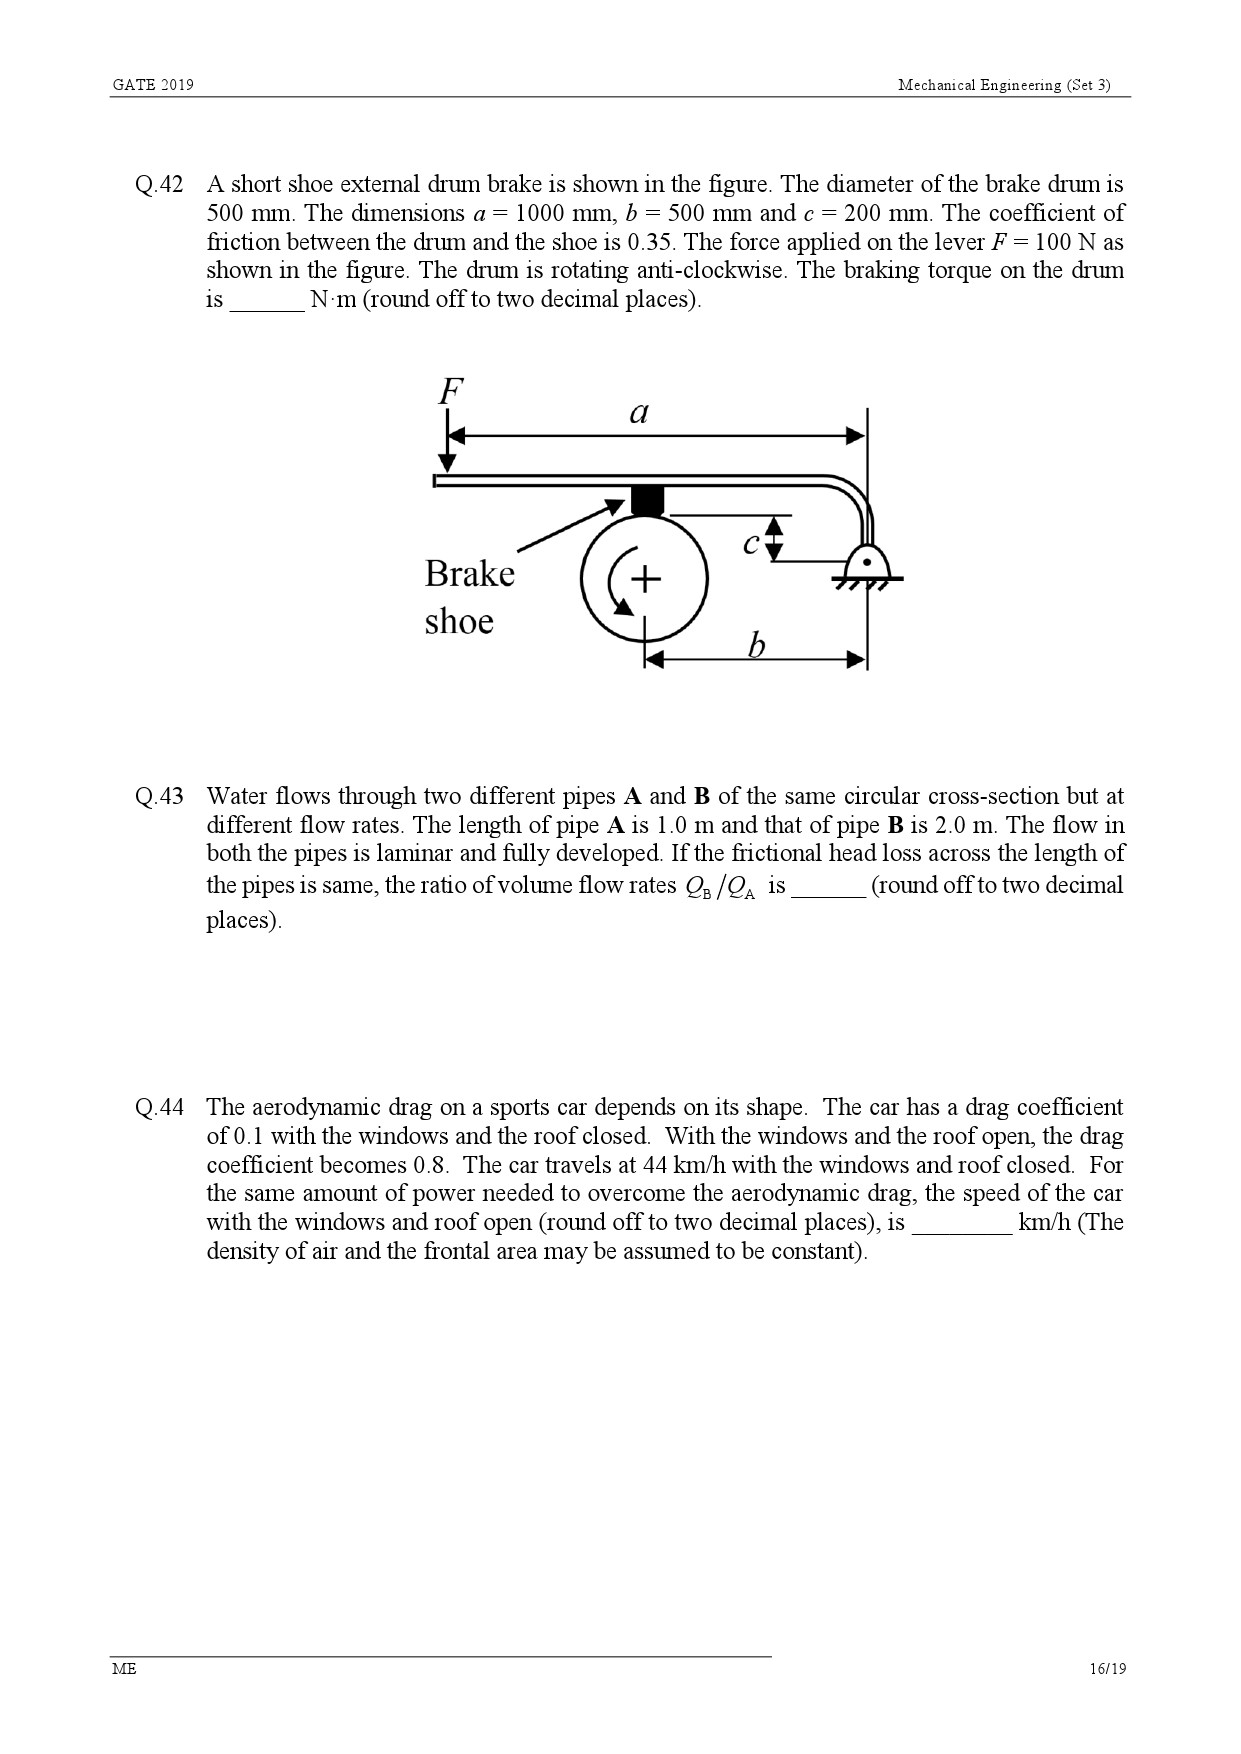 GATE Exam Question Paper 2019 Mechanical Engineering Set 3 19